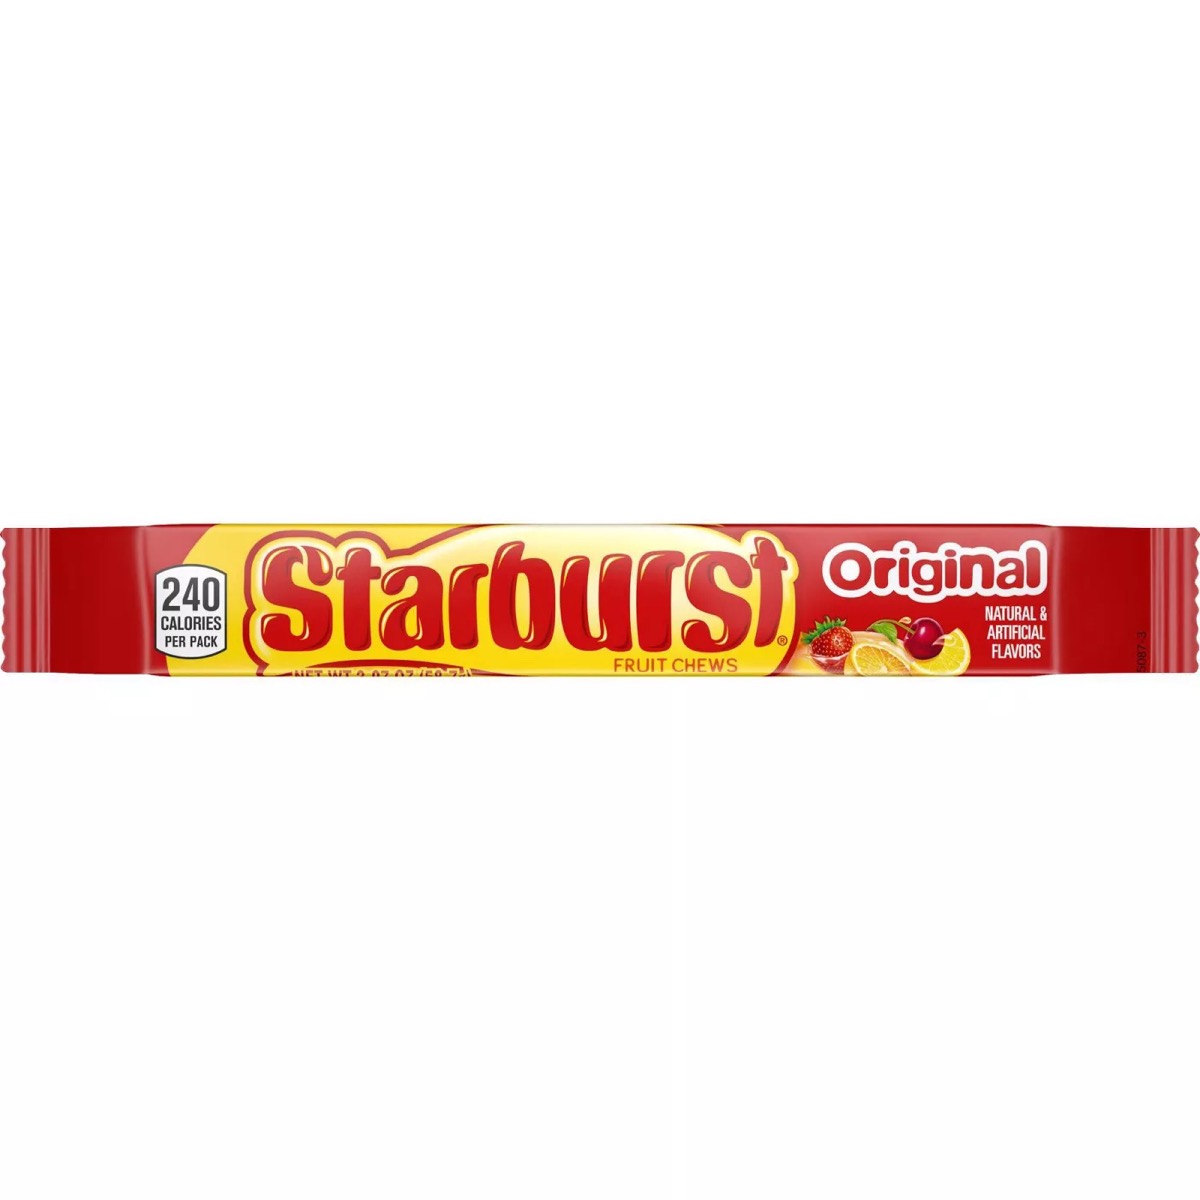 one package of starburst candy on white background